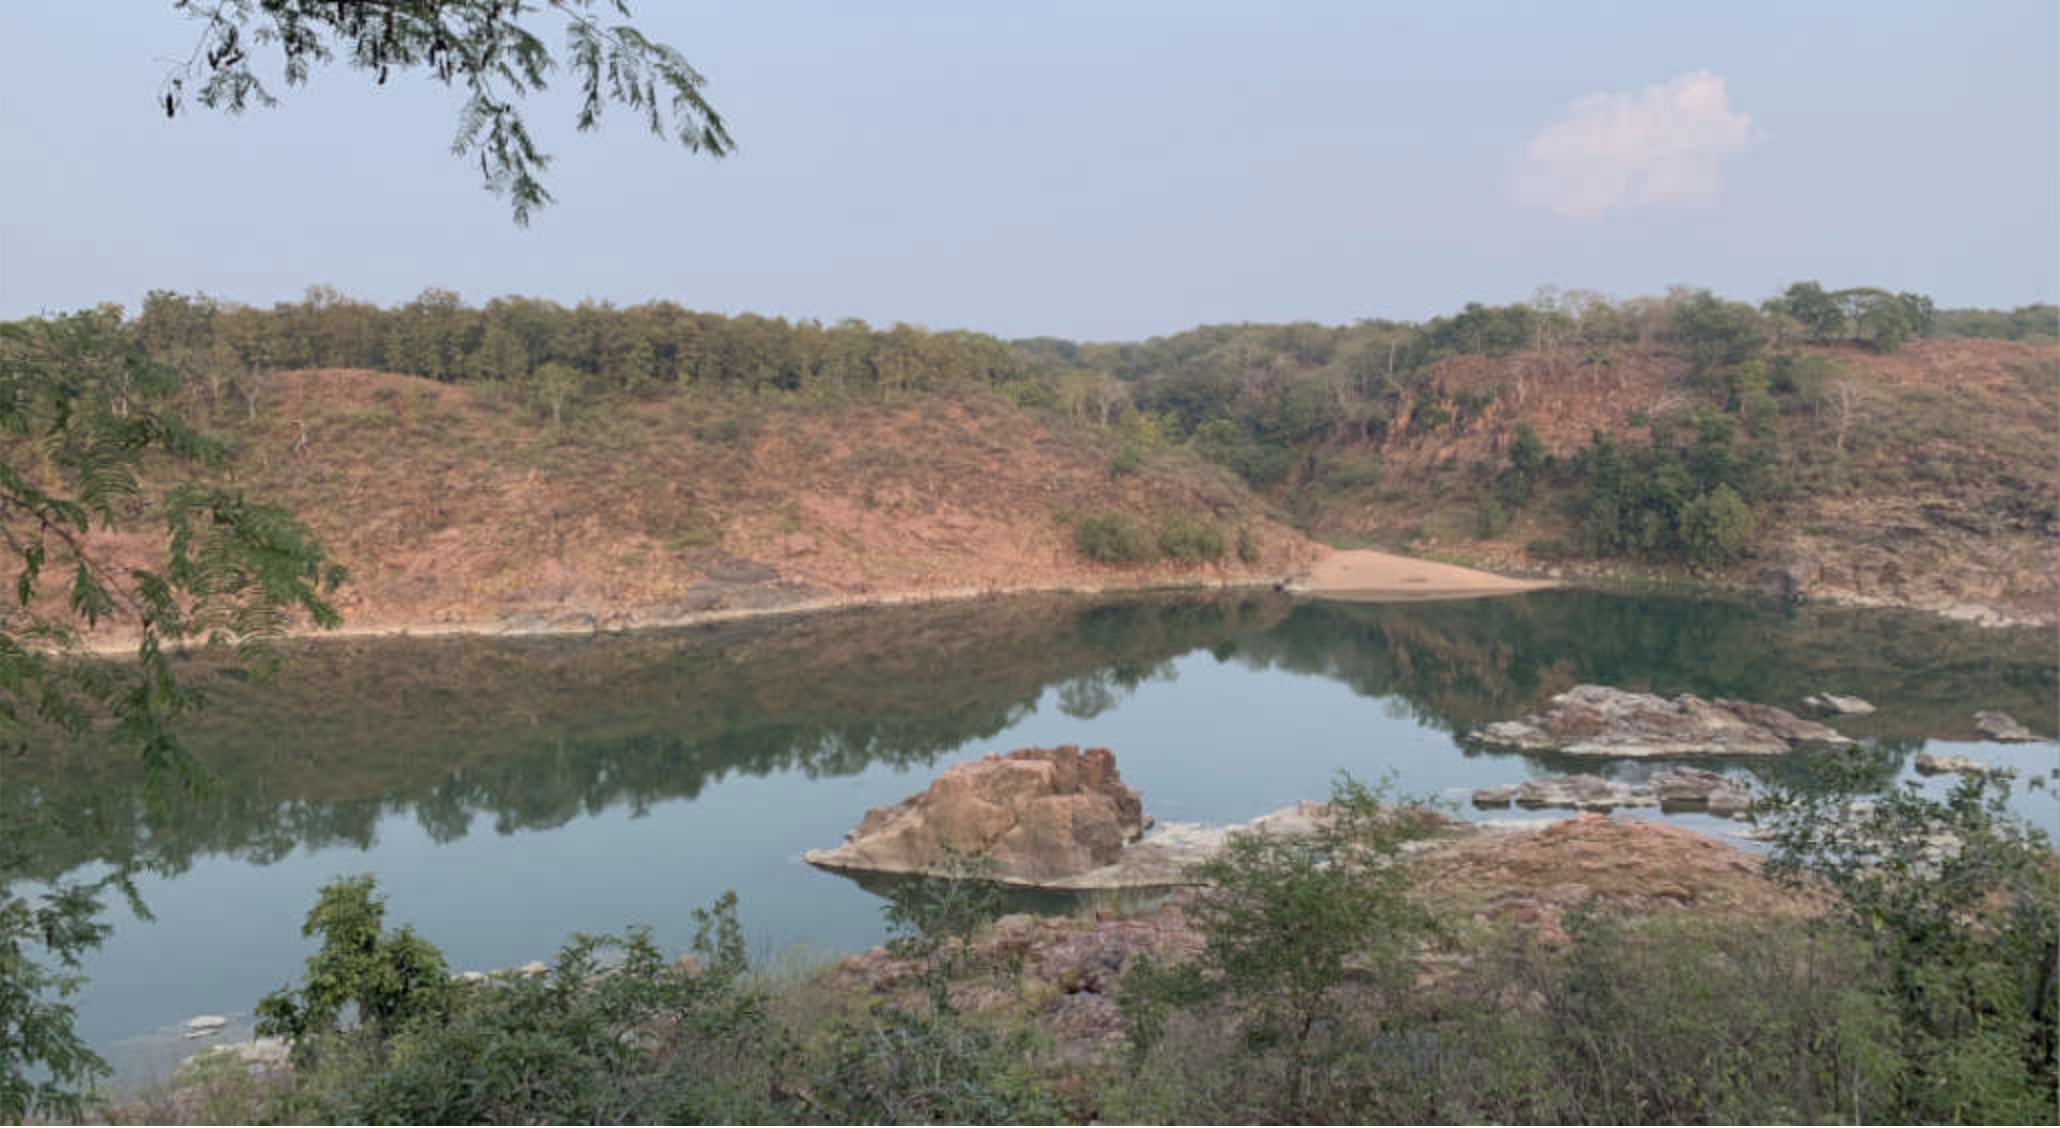 A view of the River Ken flowing through the Ken Gharial Sanctuary, one of the two Protected Areas that would be negatively impacted if the Ken-Betwa link project goes ahead. Image by Tish Sanghera. India, undated.